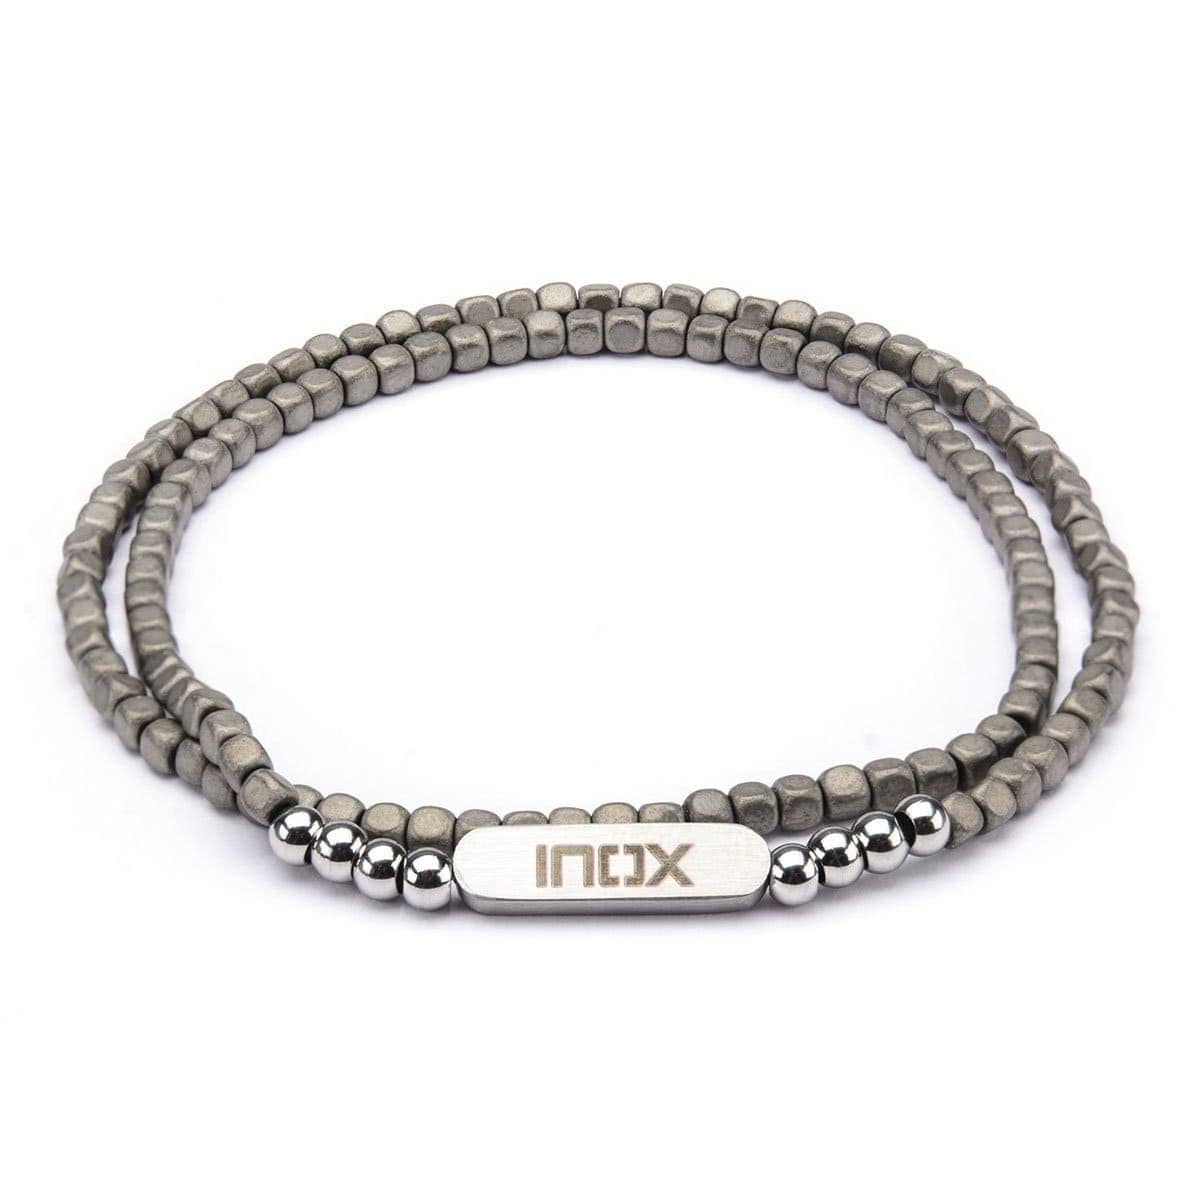 INOX JEWELRY Bracelets Silver Stainless Steel with Gray Hematite 6mm Cube Bead Stackable Bracelet BR621